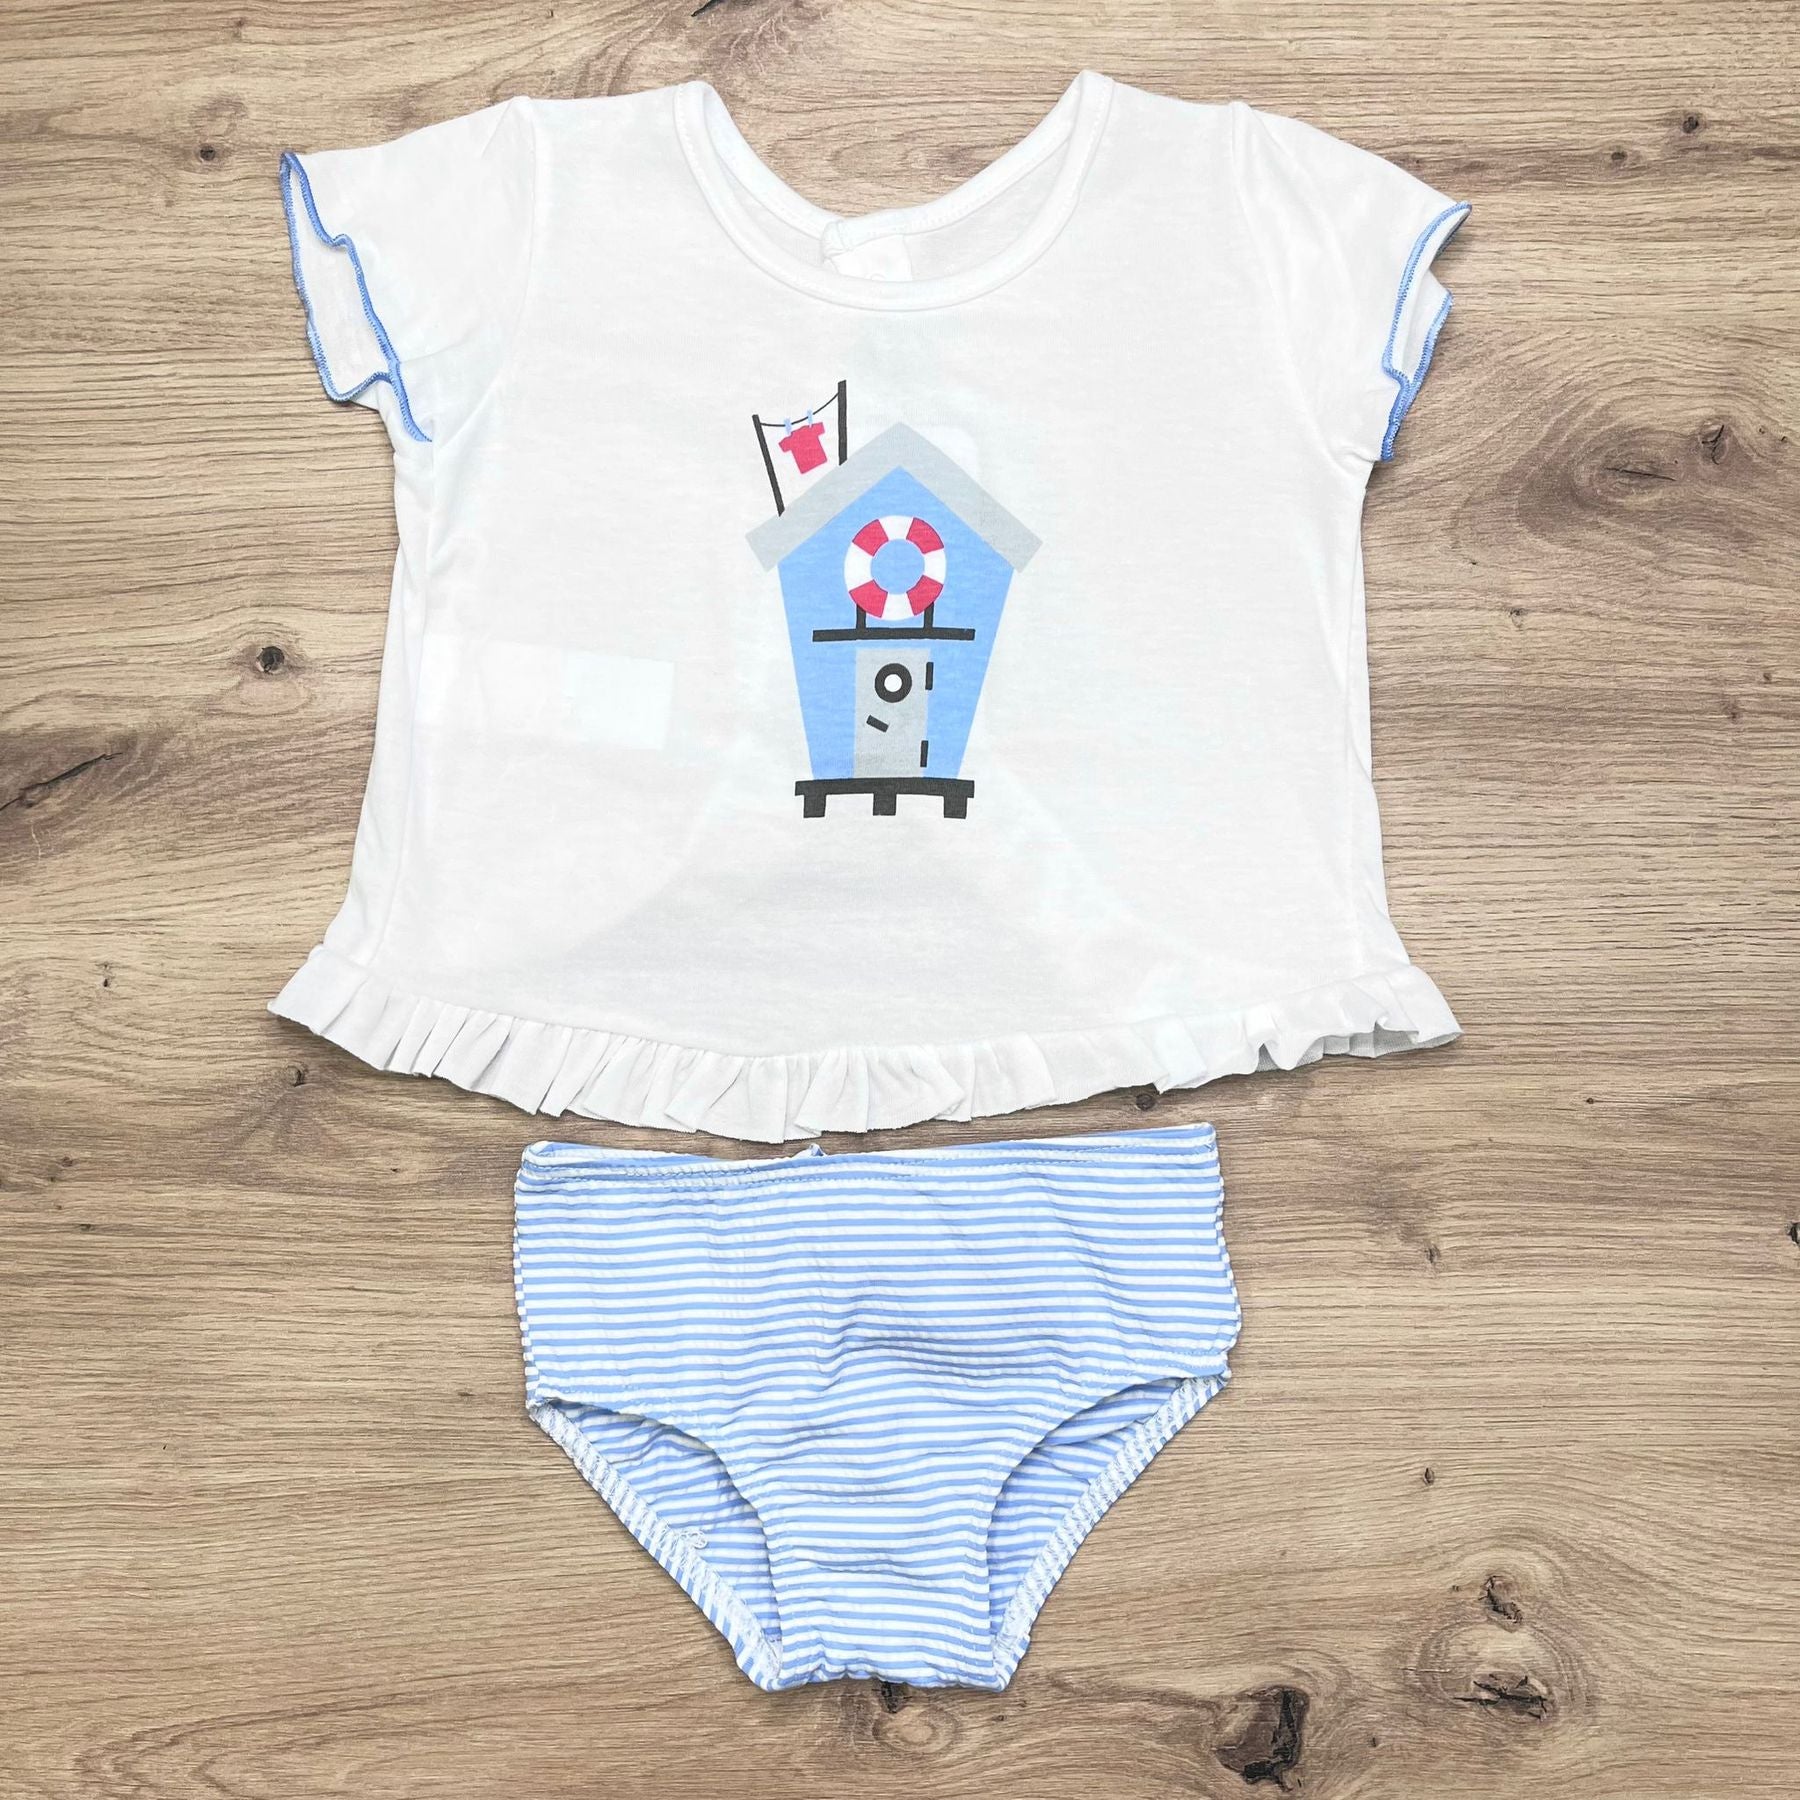 Squid T-shirt with striped swimsuit with bow